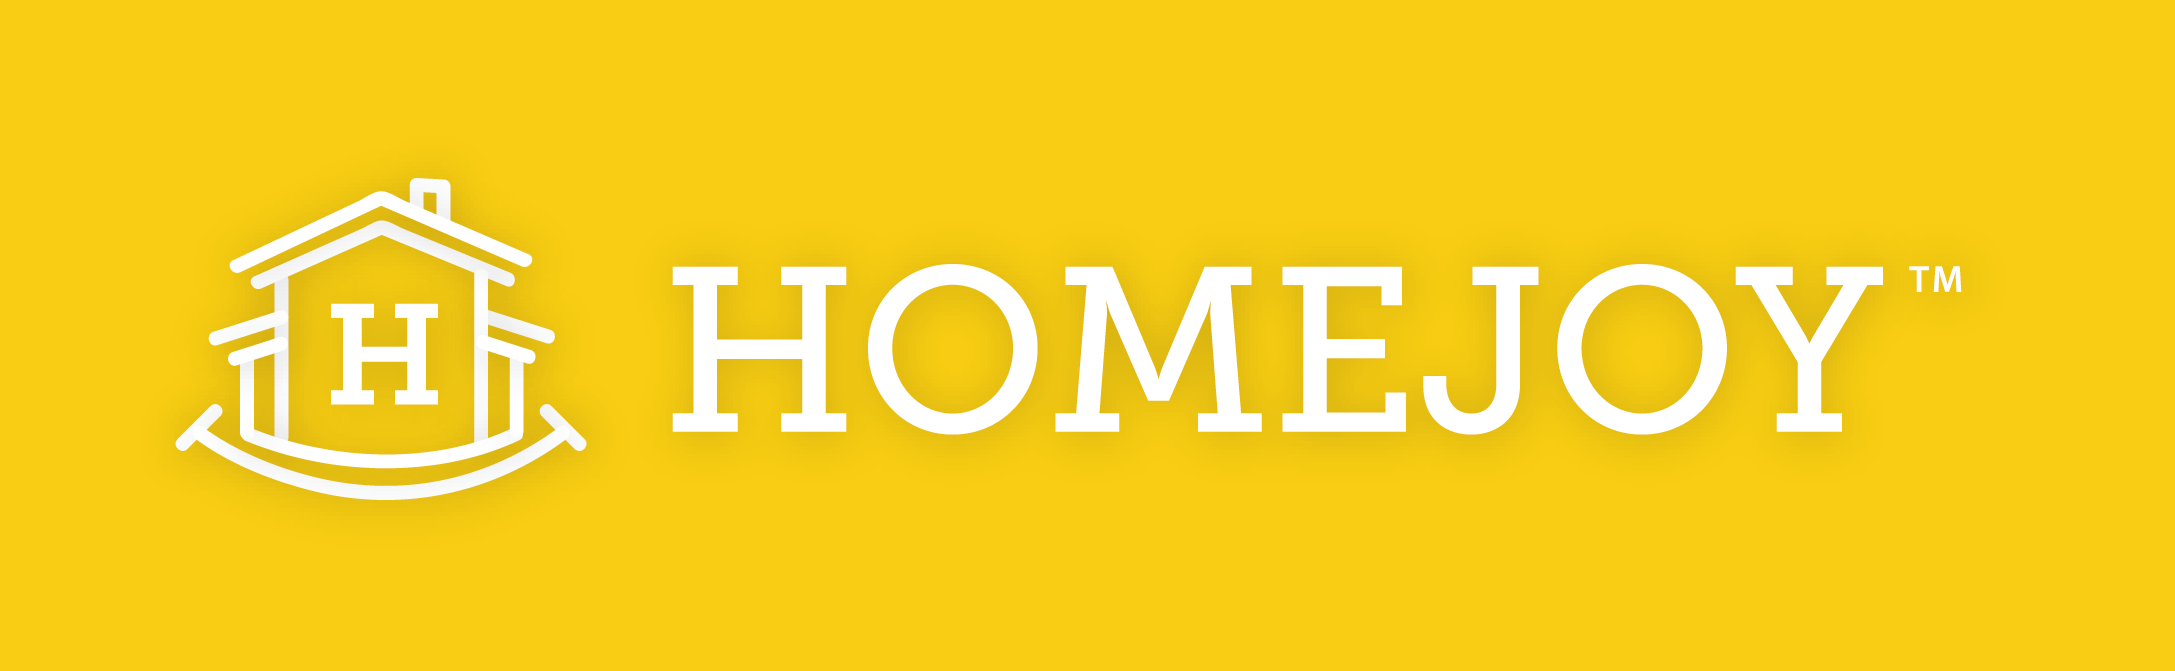 Homejoy Implodes: Legal Challenges Cited, Management To Blame Too